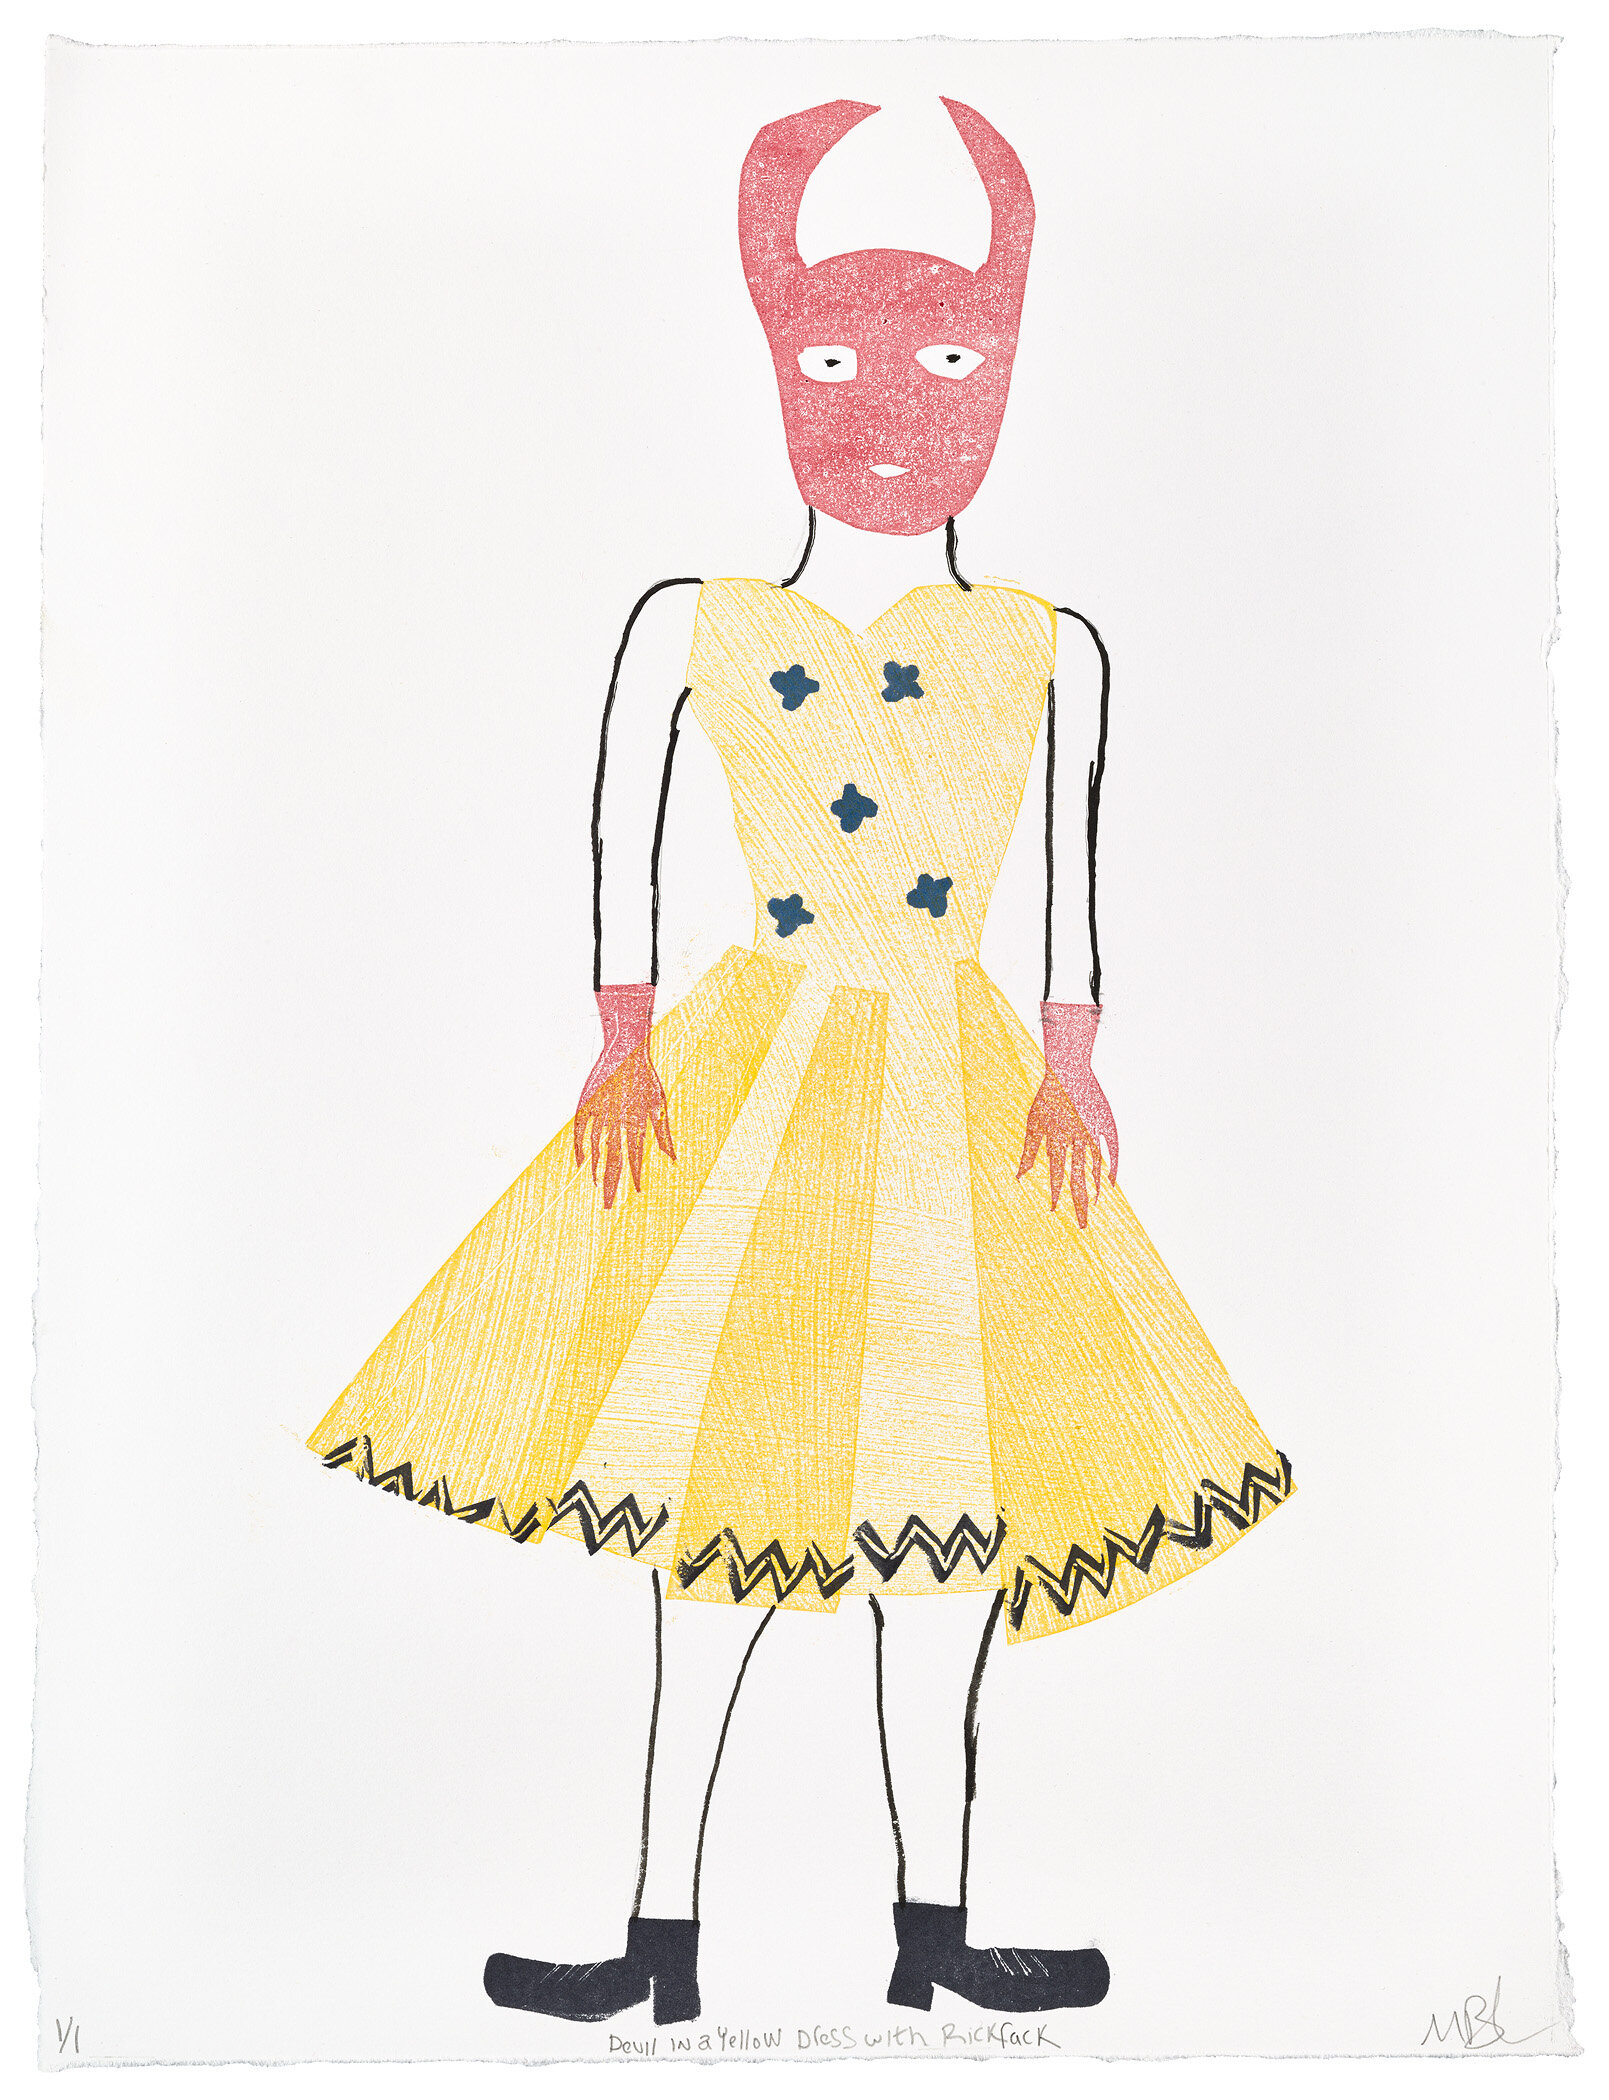 Devil in a Yellow Dress with Rickrack